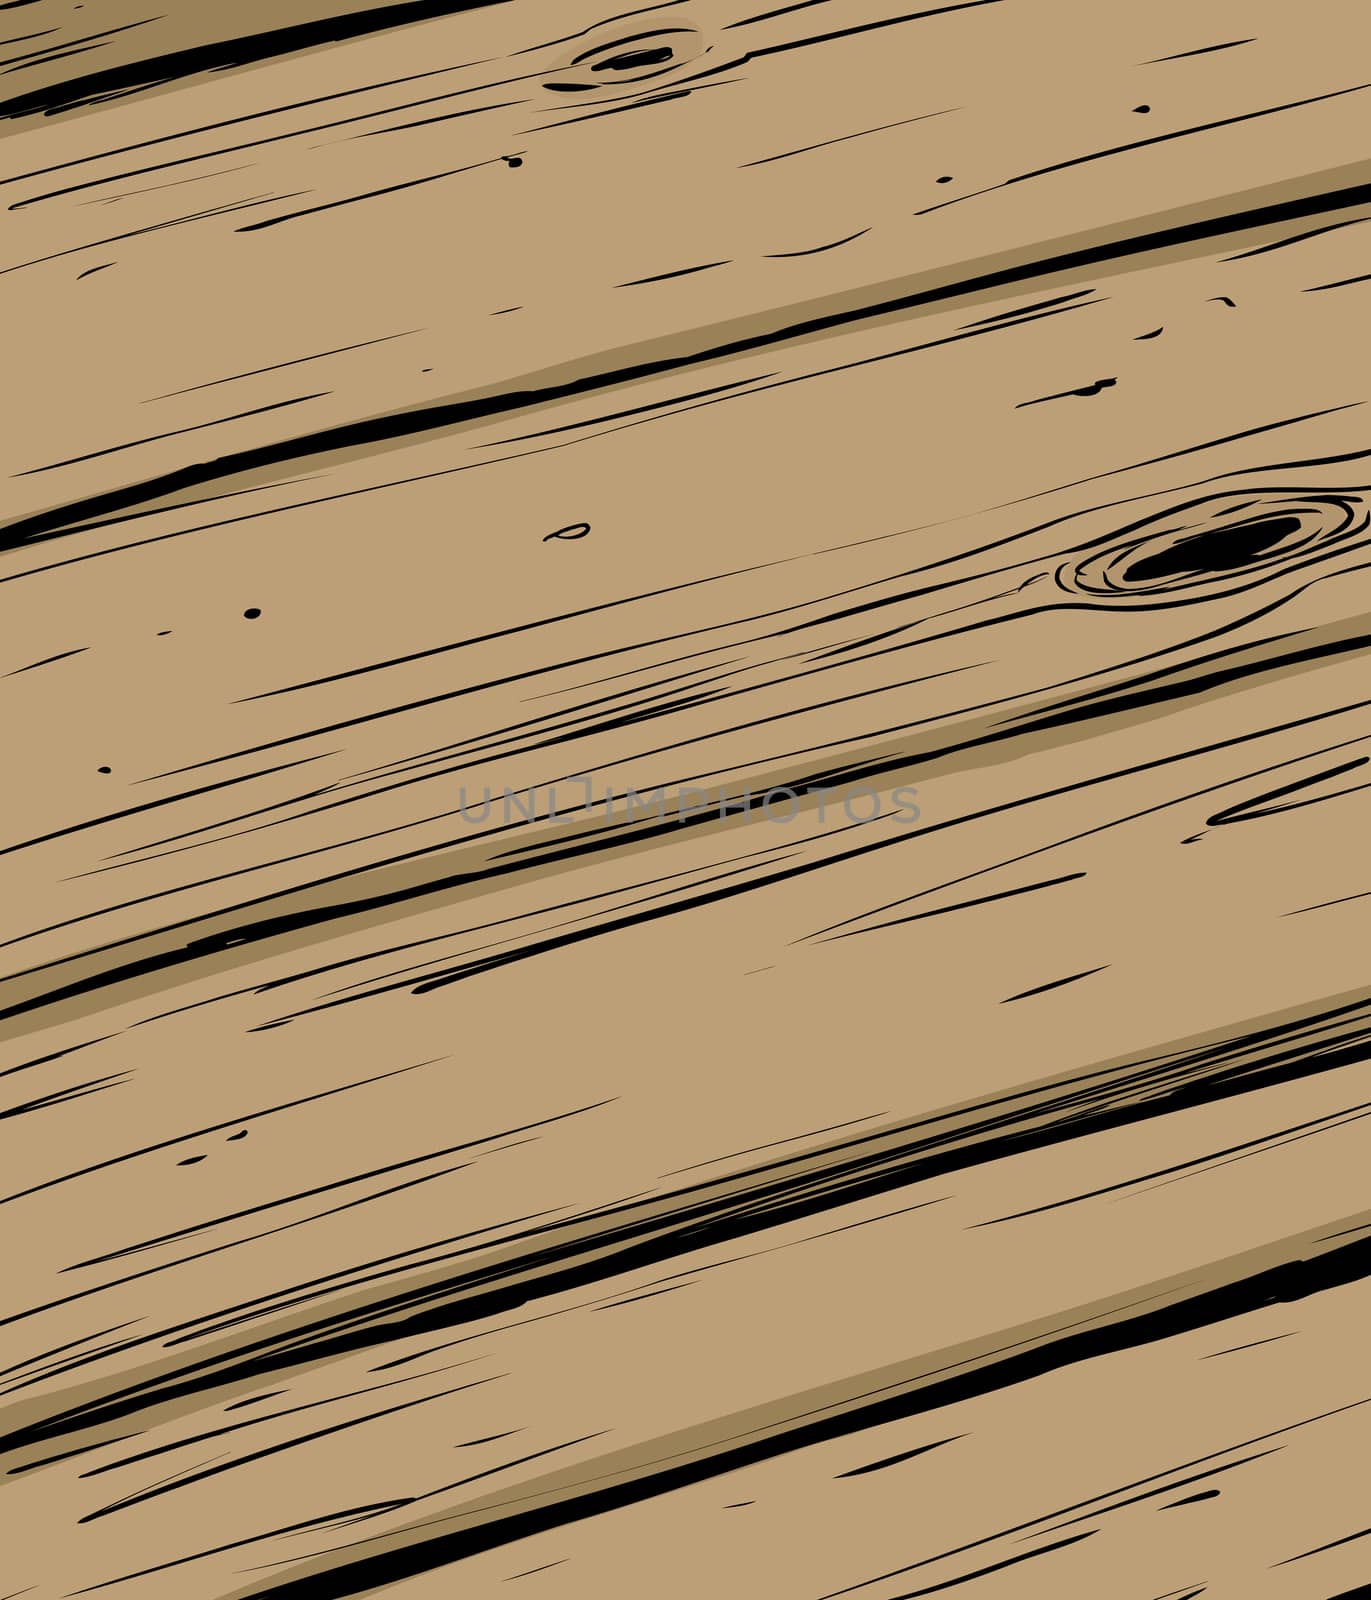 Hand drawn illustration background of wooden planks close up